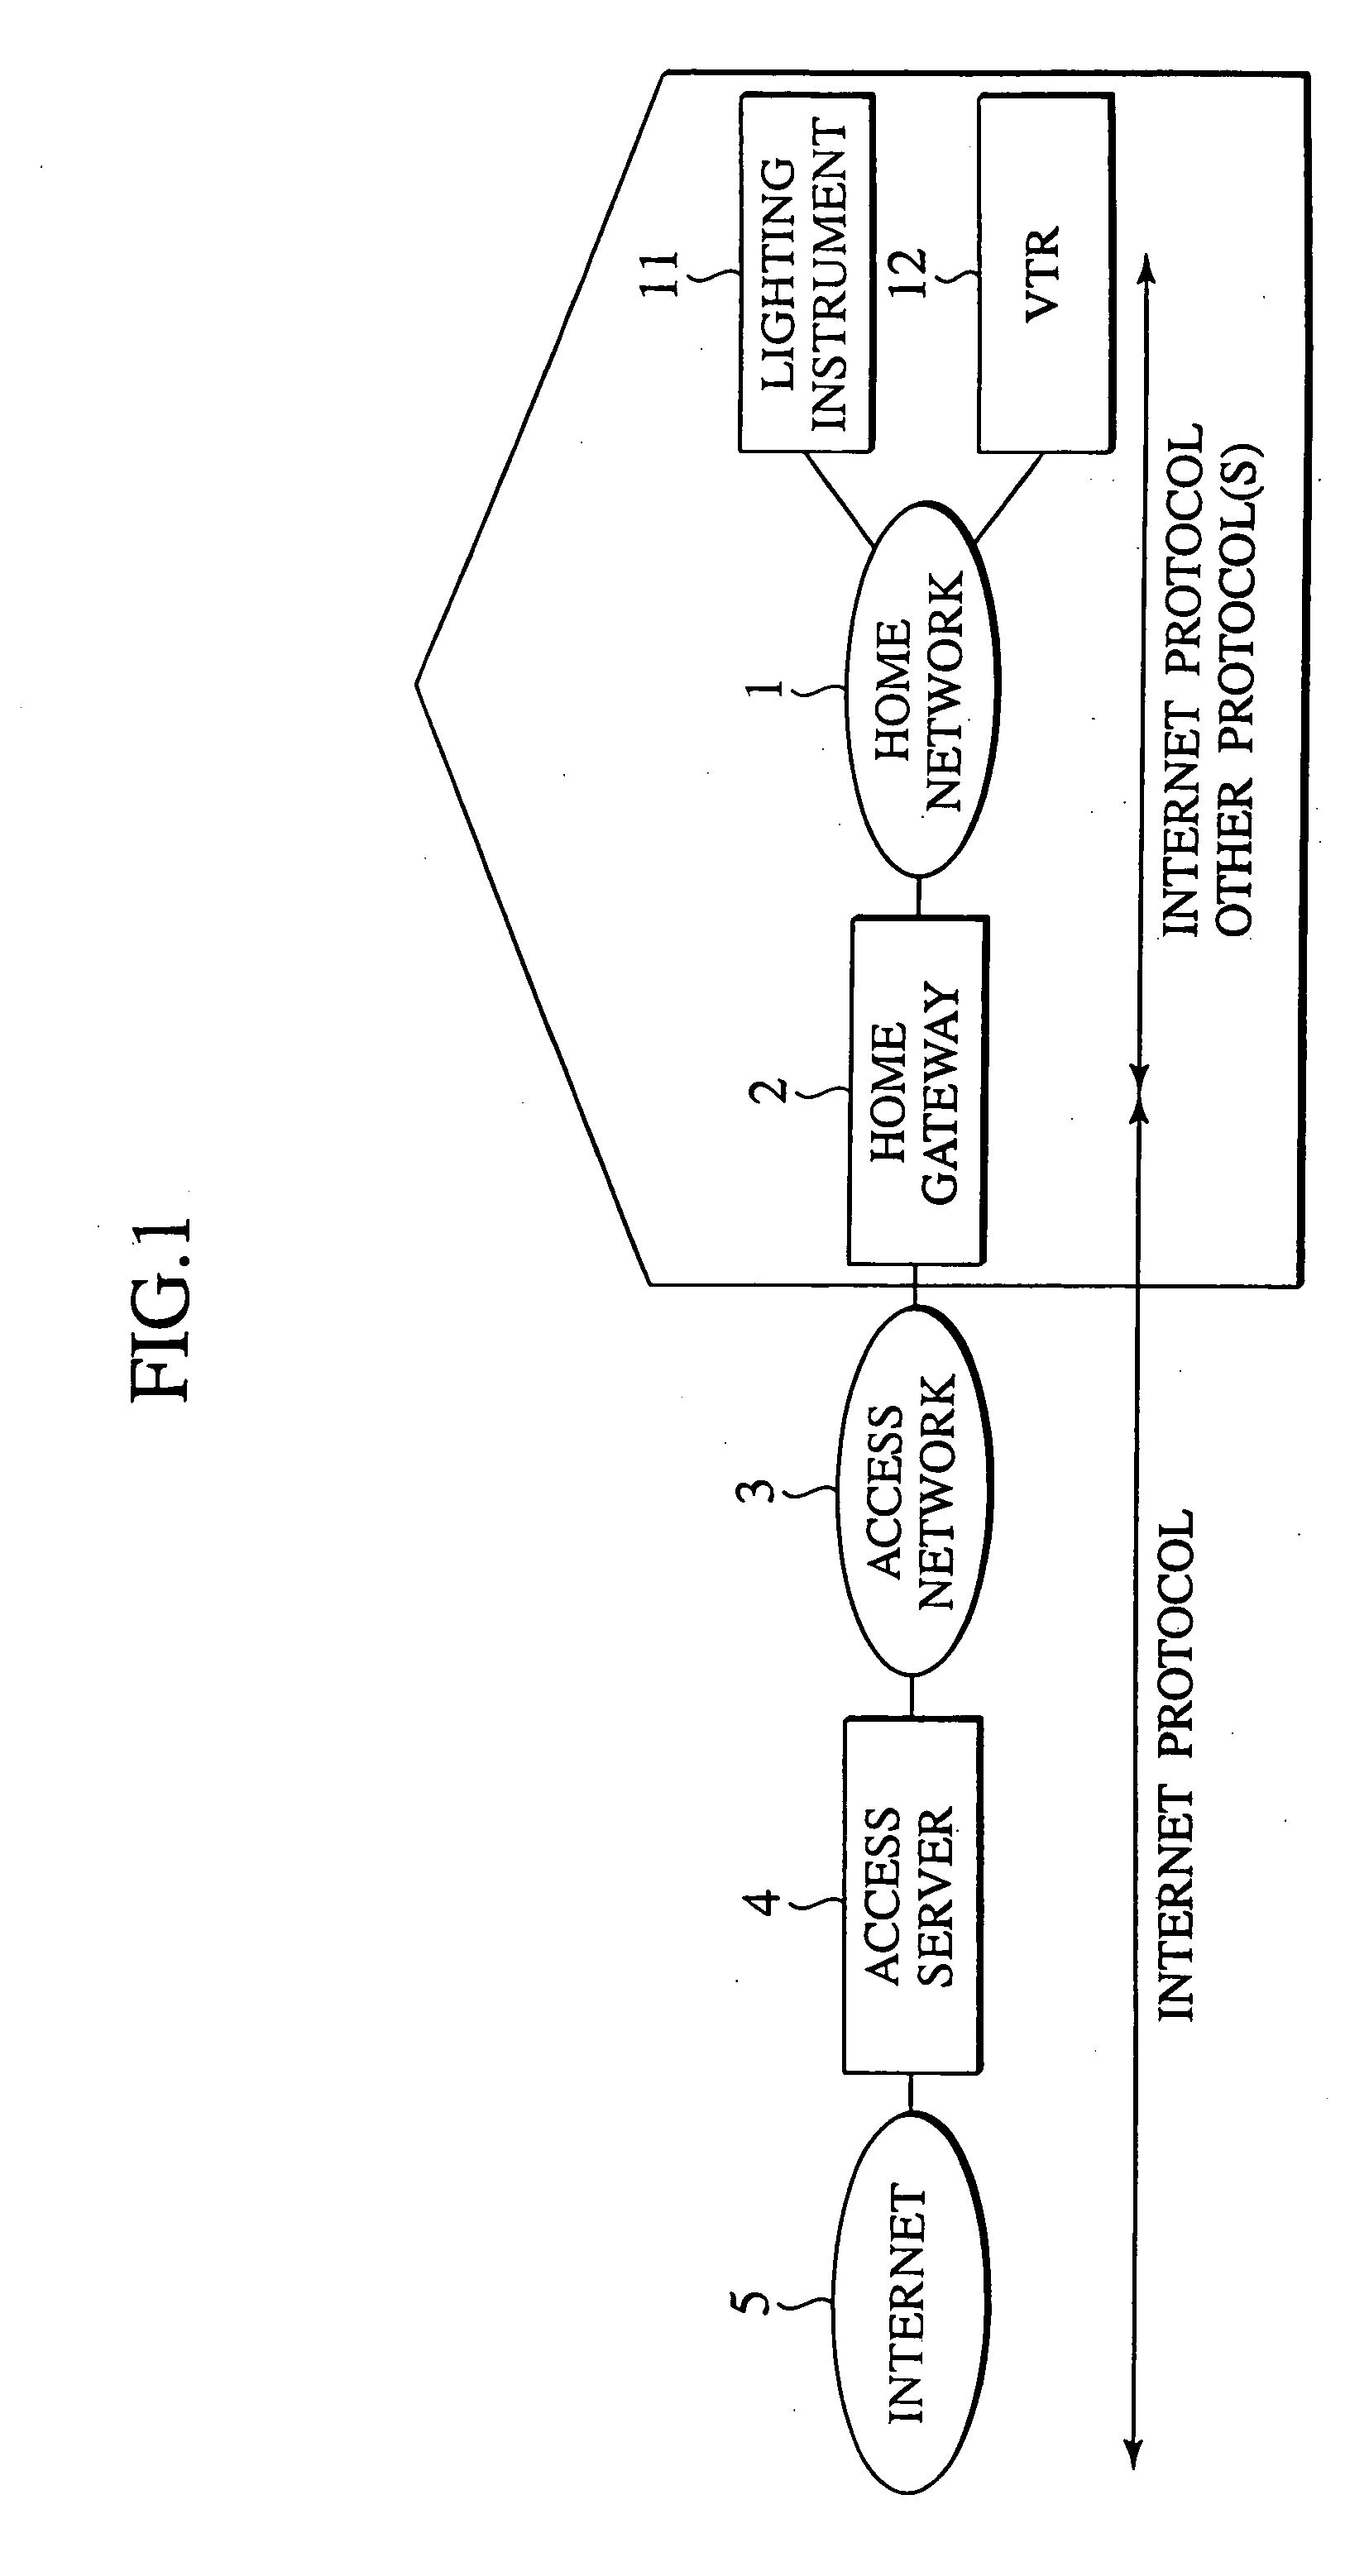 Communication system using home gateway and access server for preventing attacks to home network